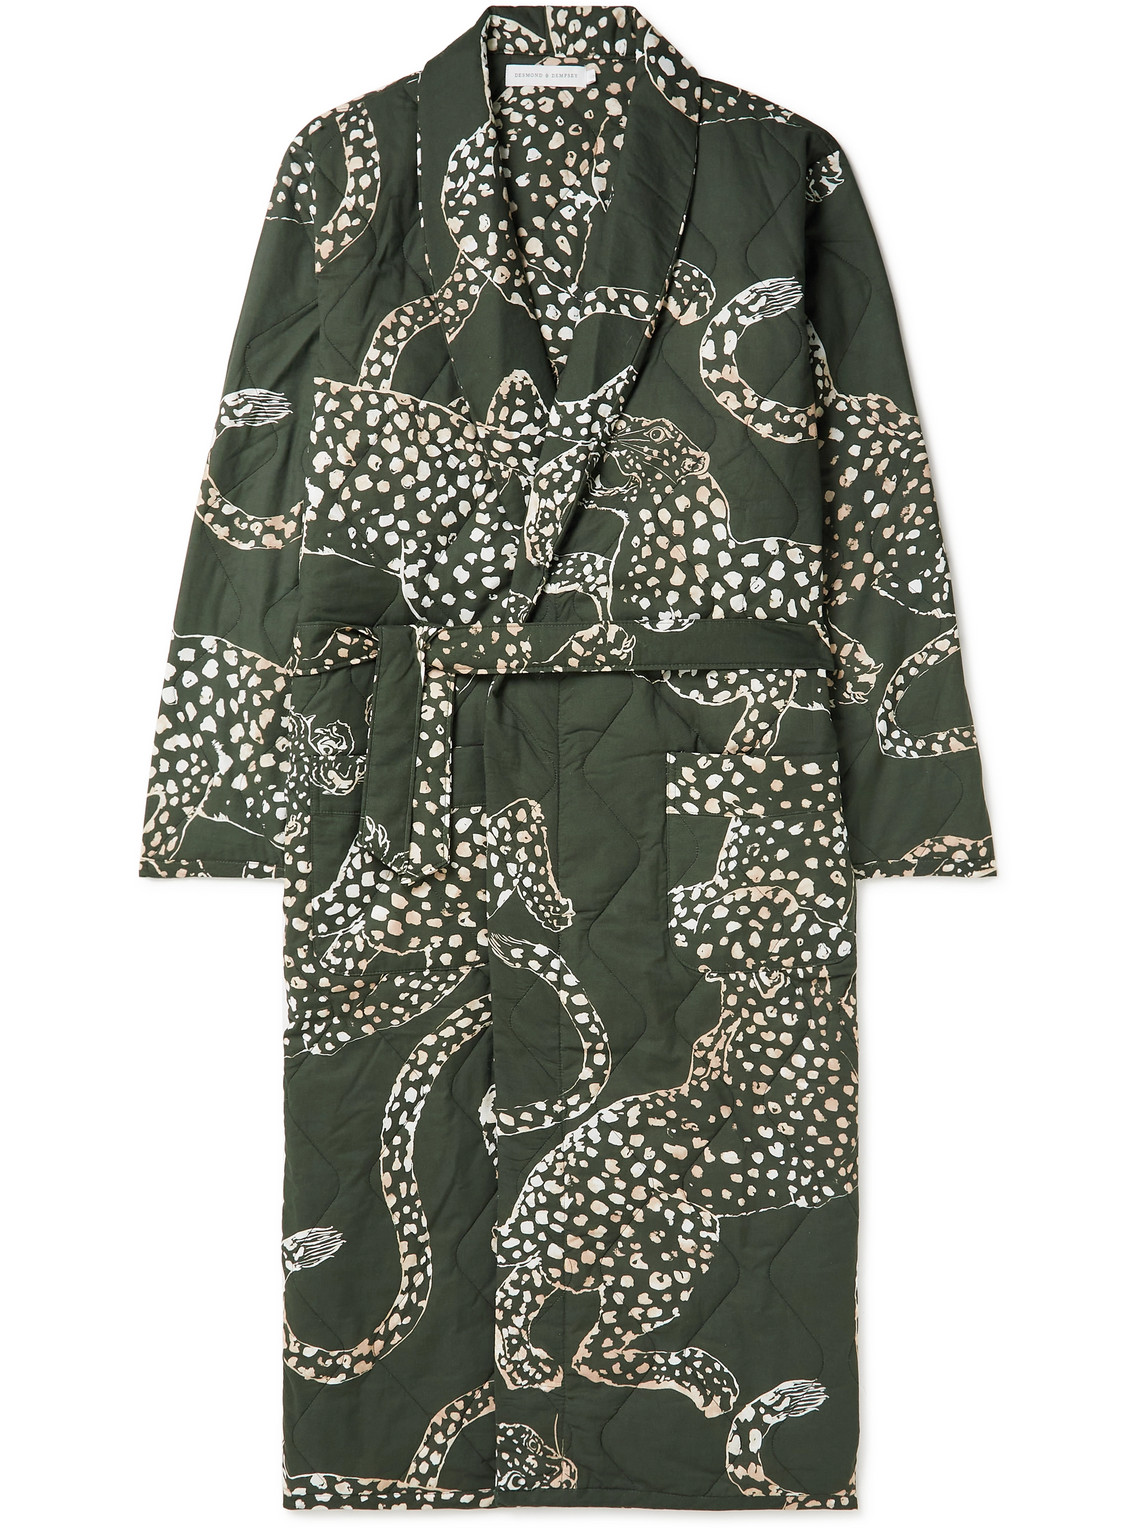 Quilted Printed Cotton Robe